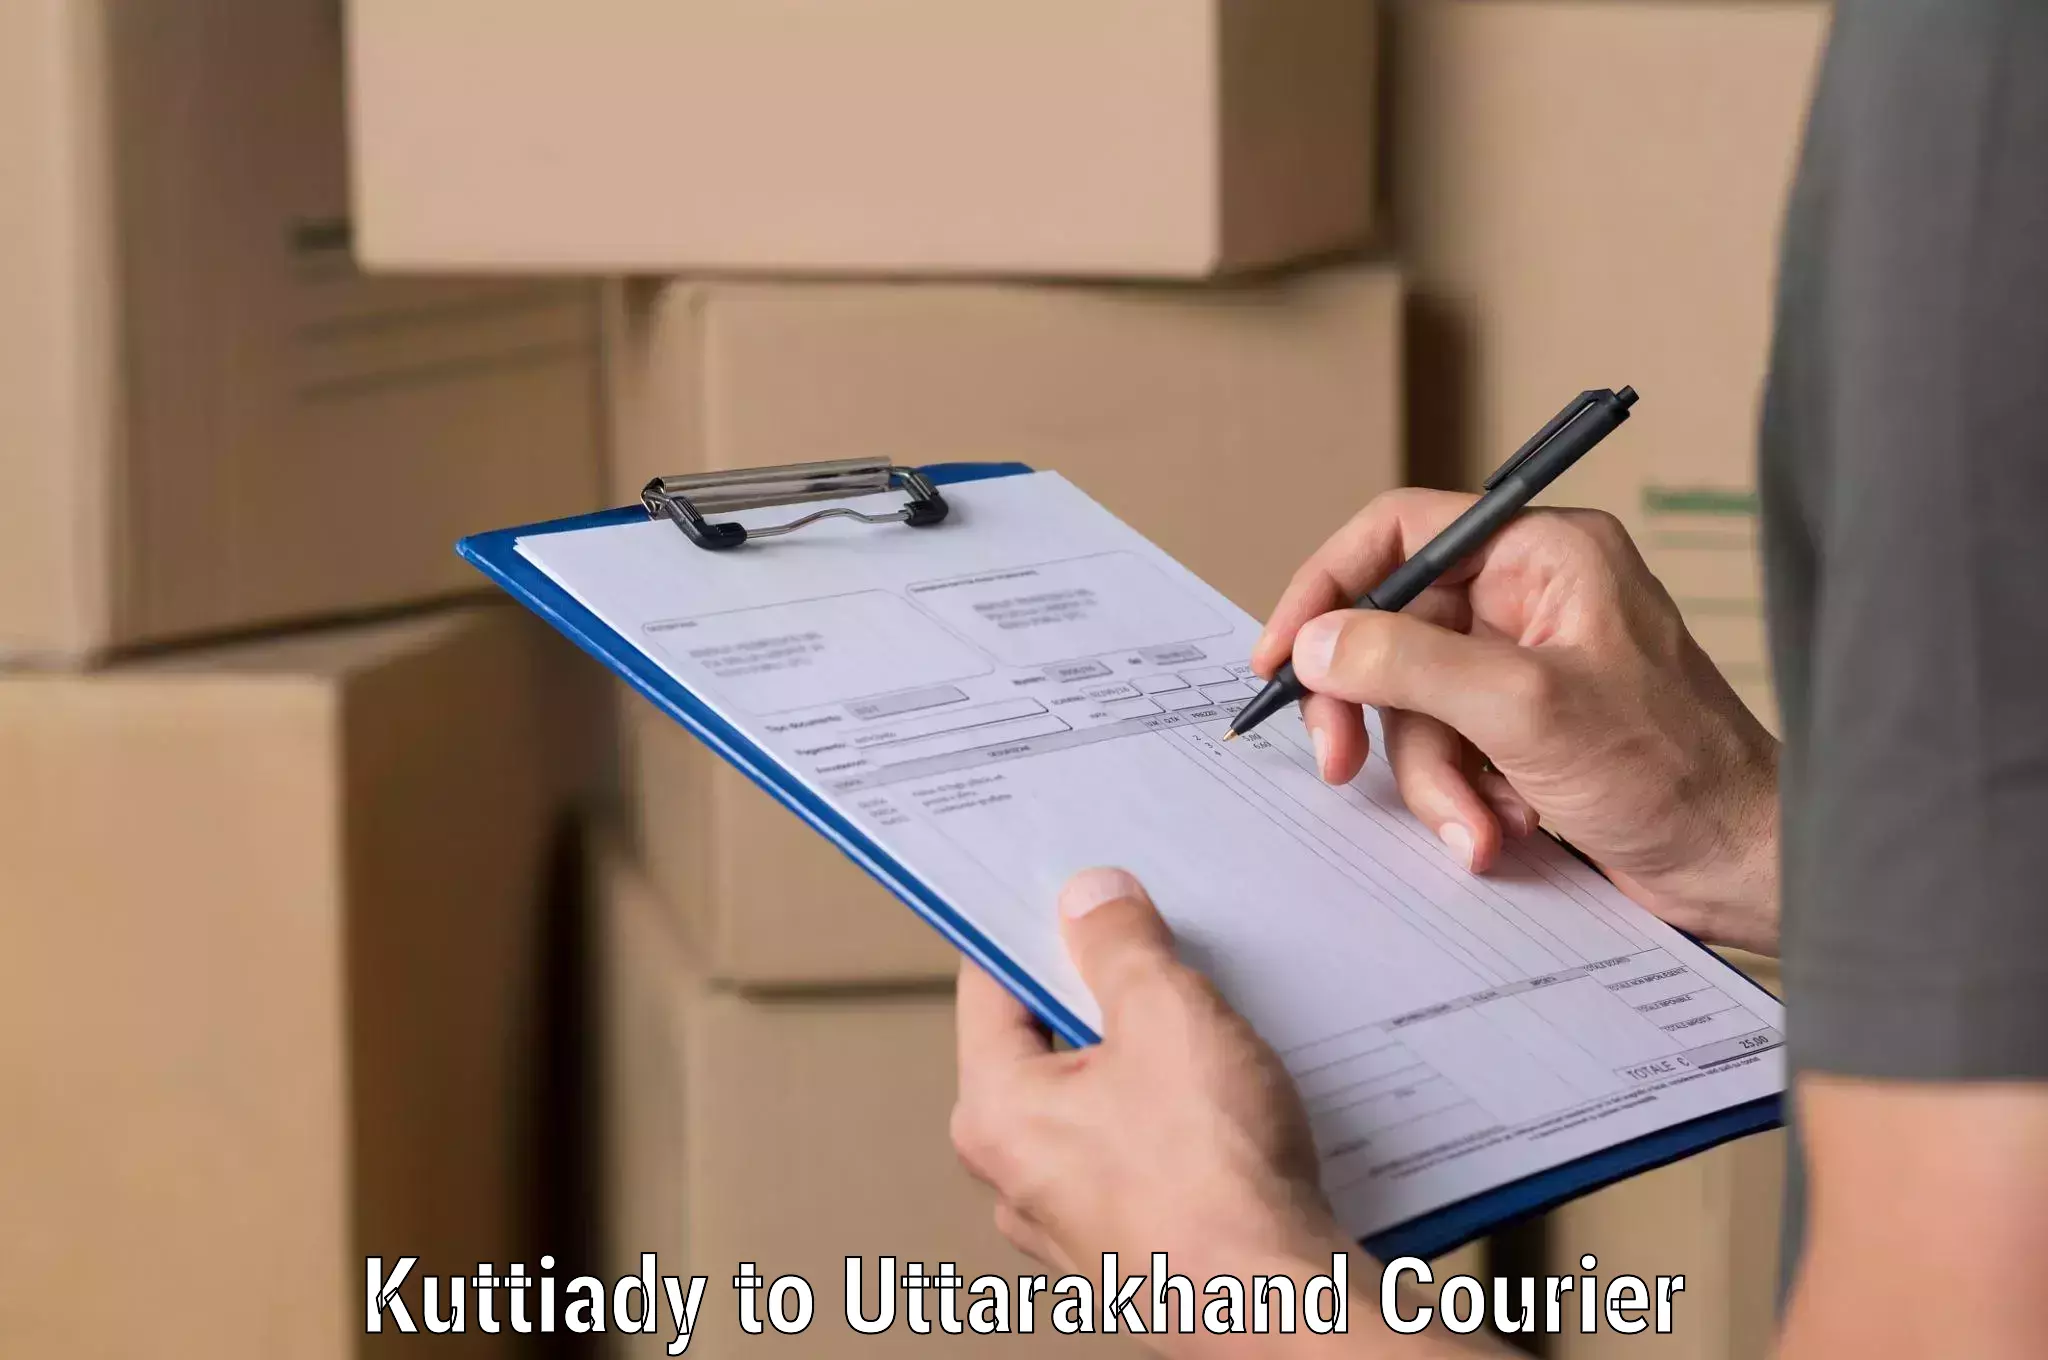 Large-scale shipping solutions Kuttiady to Bhagwanpur